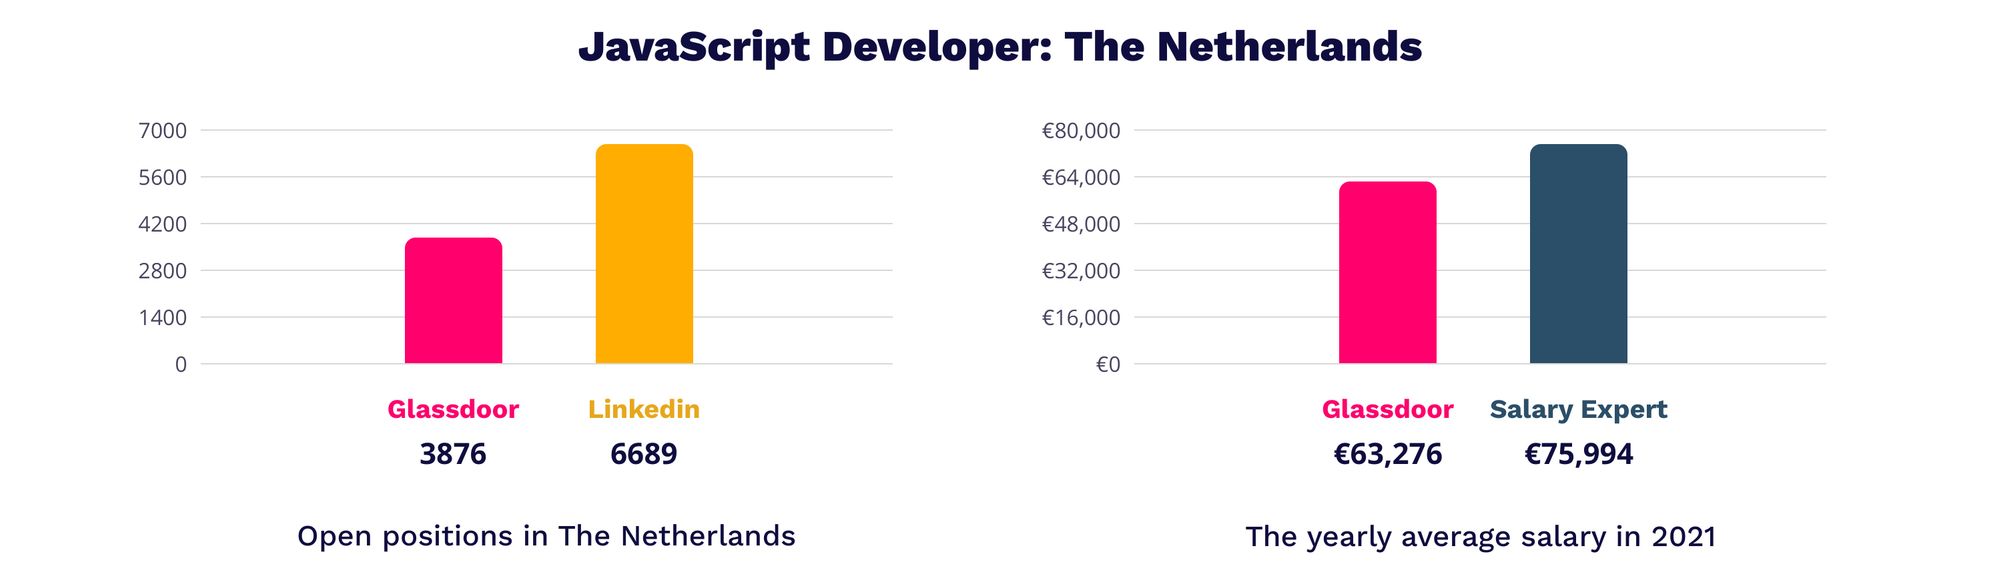 JavaScript developer salary - IT Jobs in The Netherlands | MagicHire.co